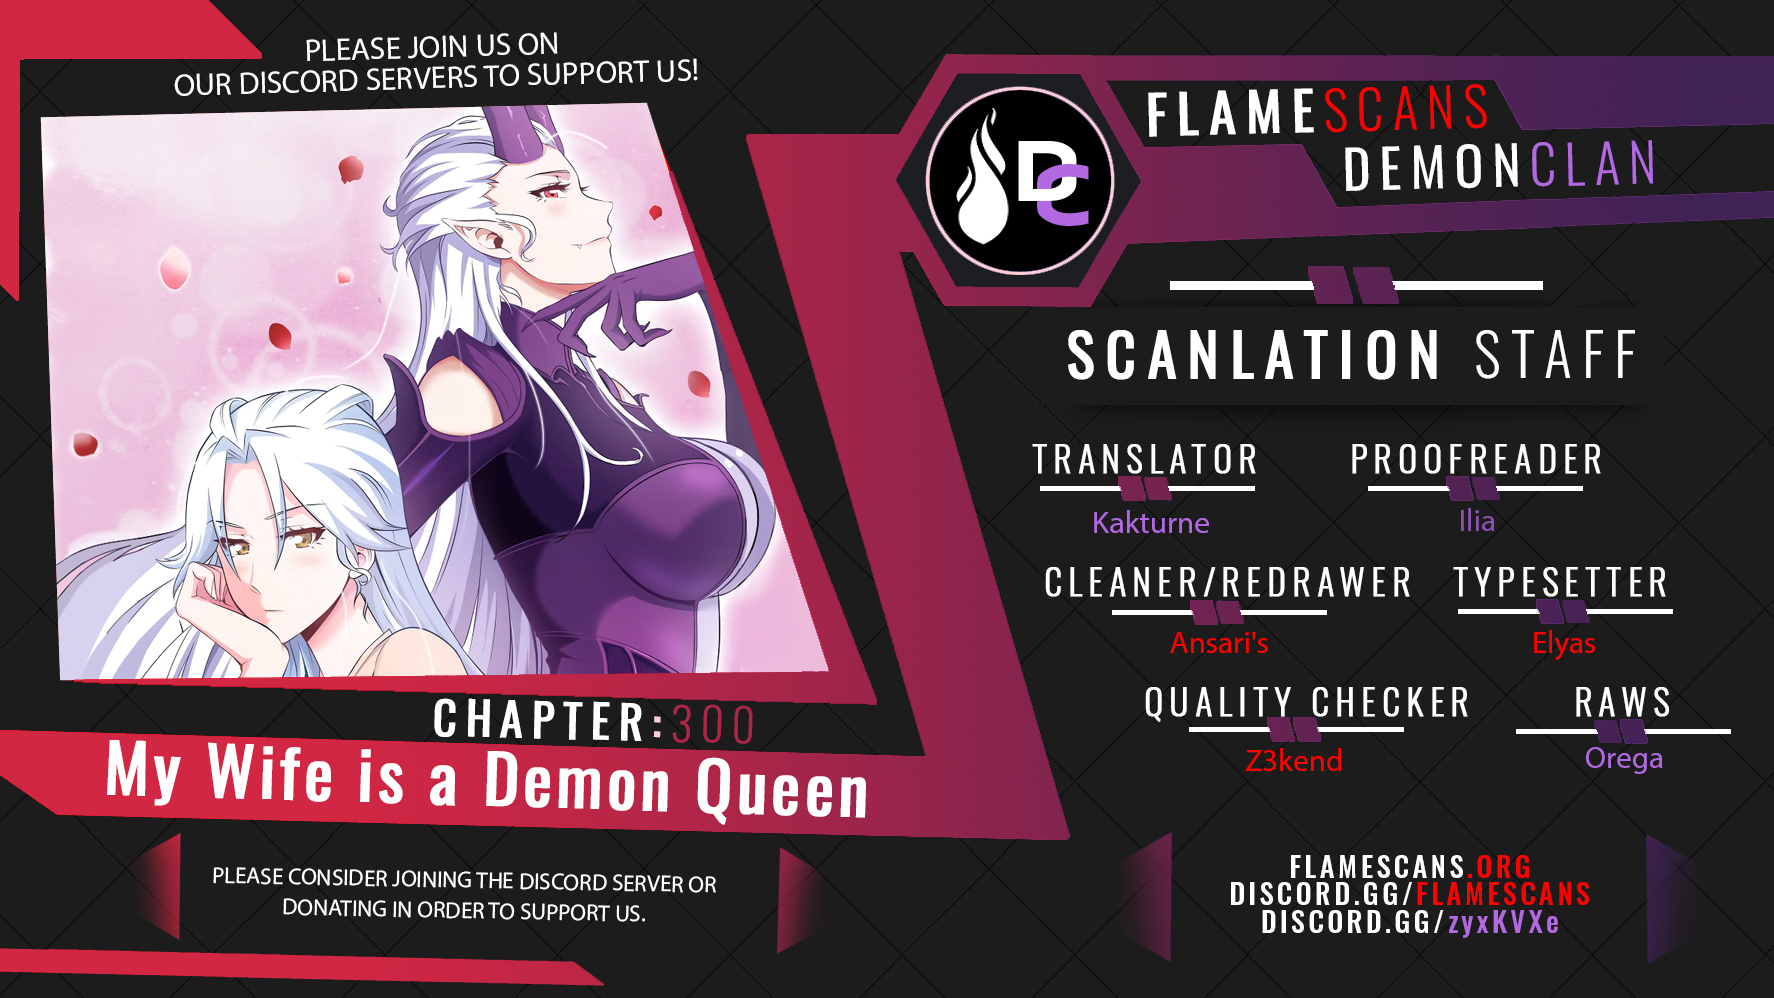 My Wife is a Demon Queen - Chapter 10918 - Image 1